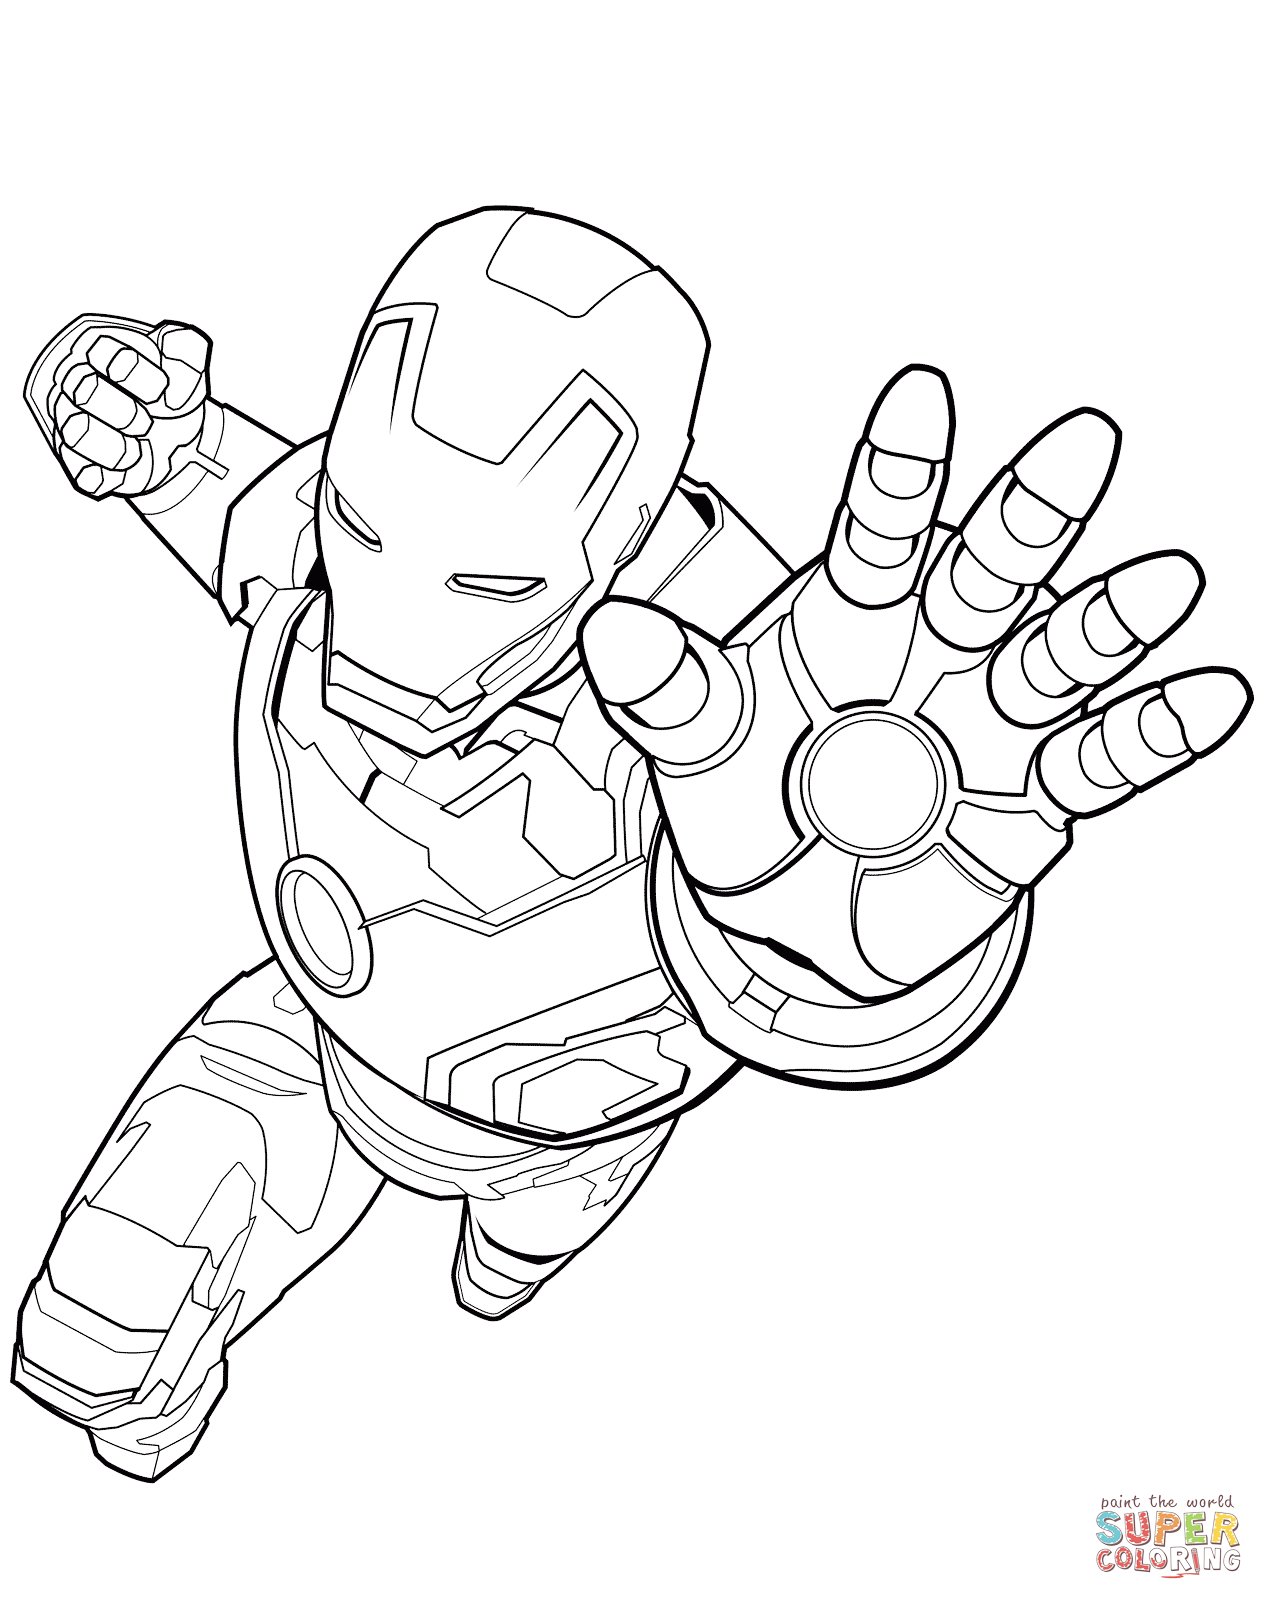 Marvel's The Avengers coloring pages | Free Coloring Pages